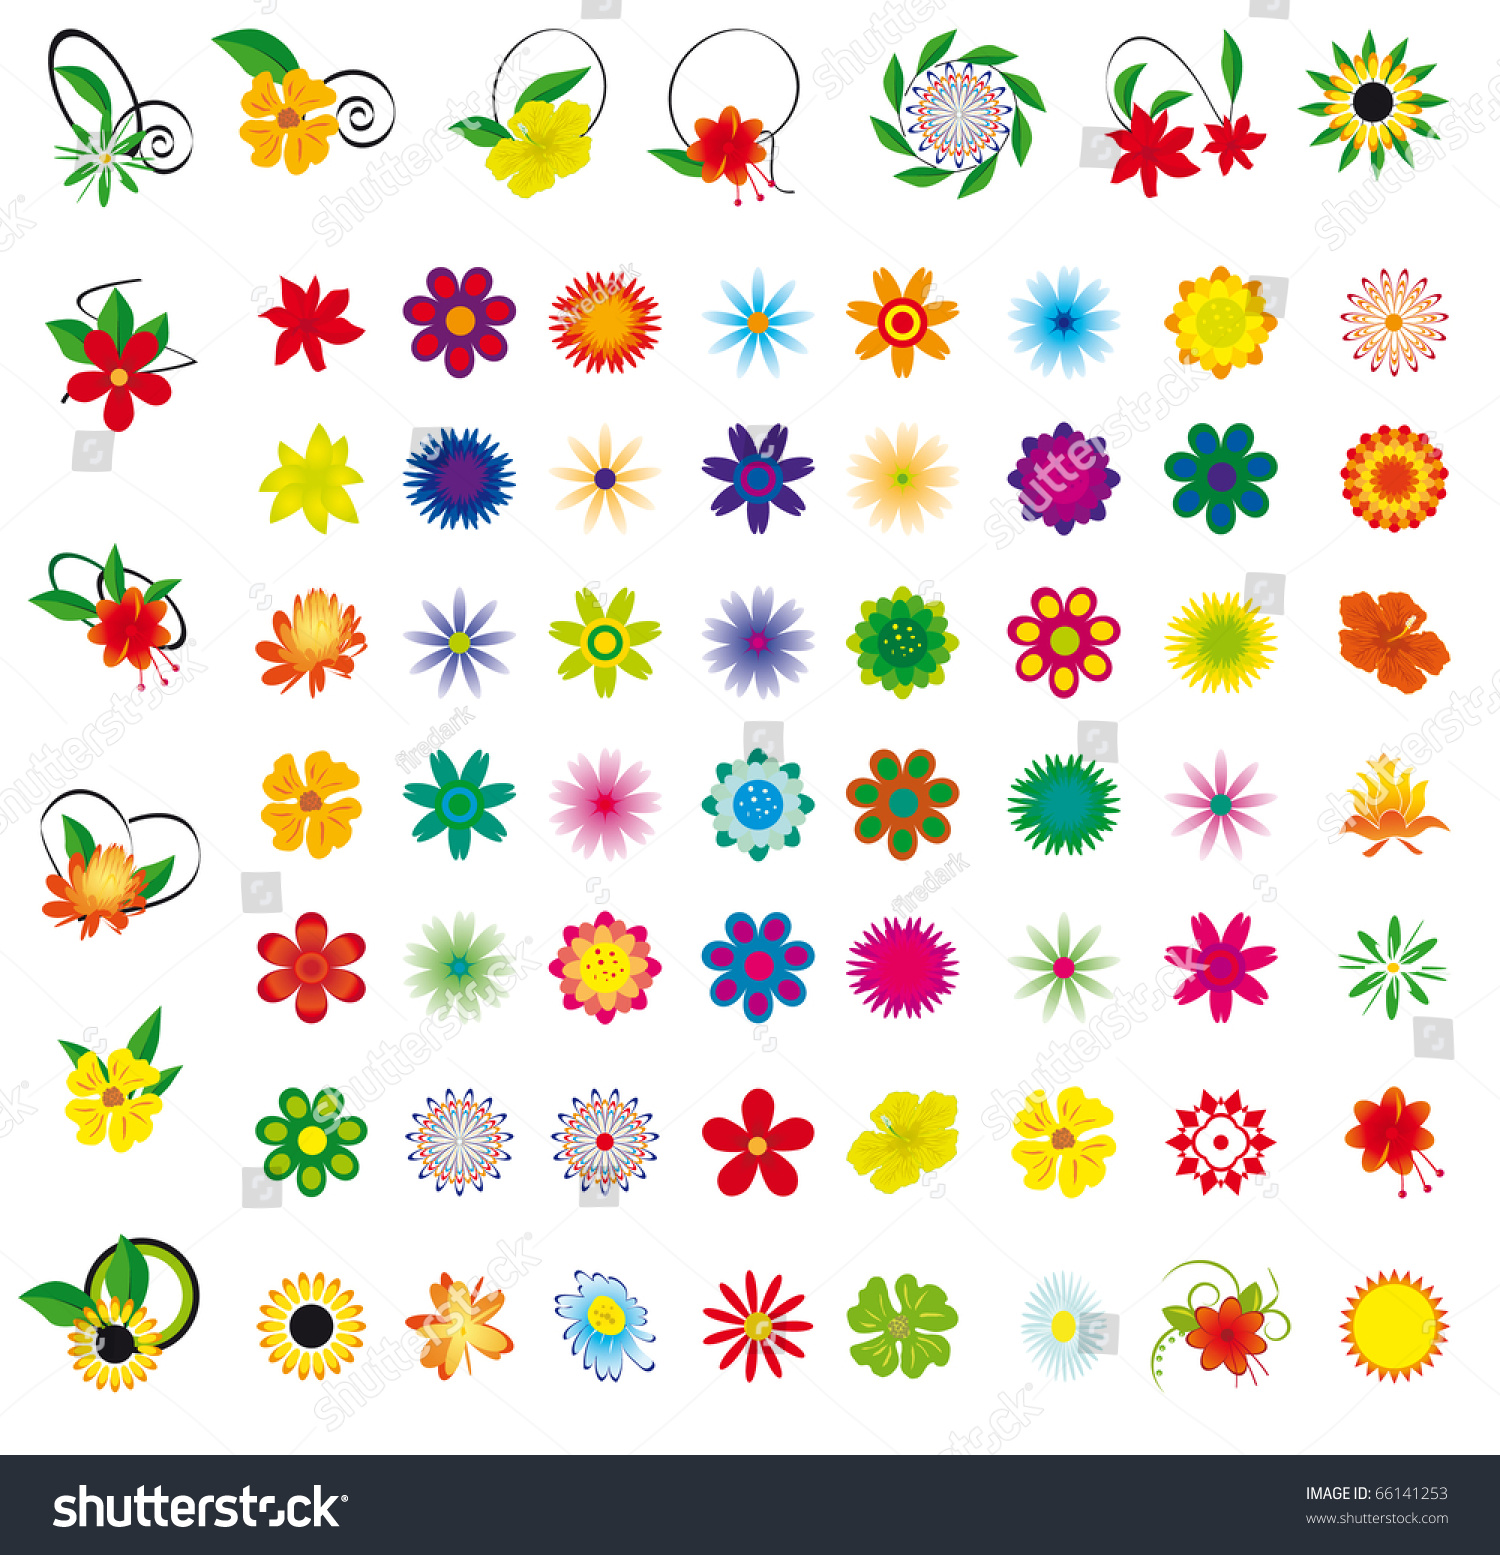 A Collection Of Flowers For The Design. Vector Illustration - 66141253 ...